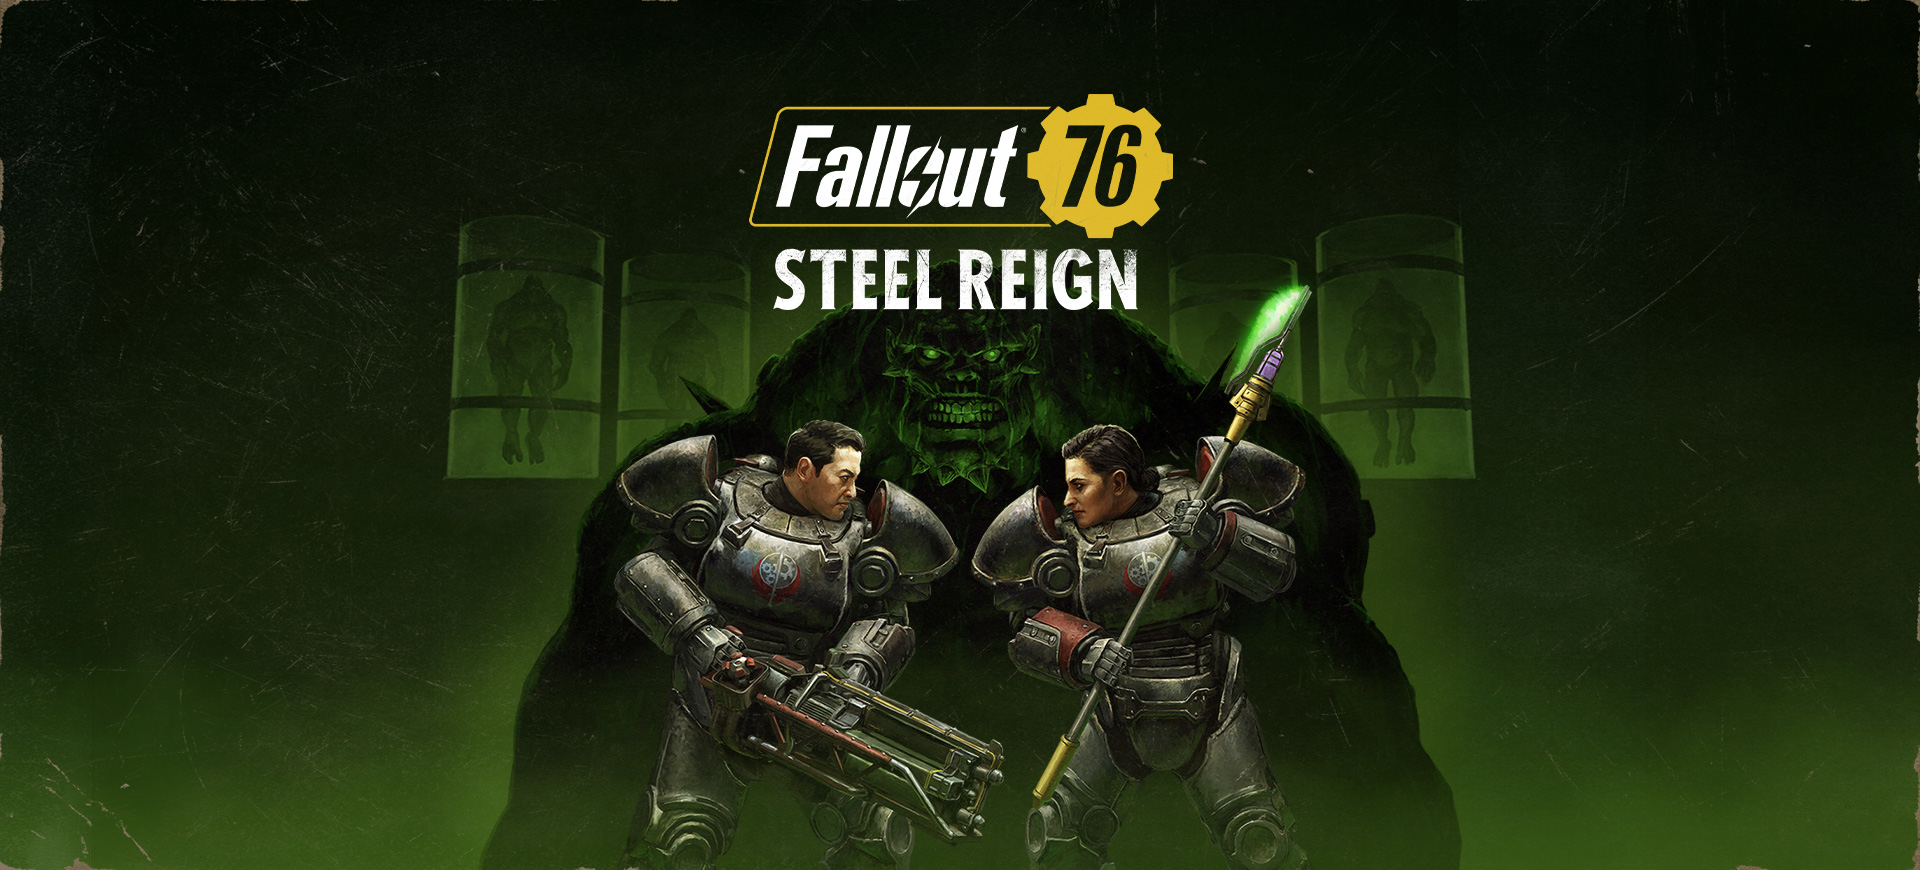 patch 7 fallout new vegas download -steam